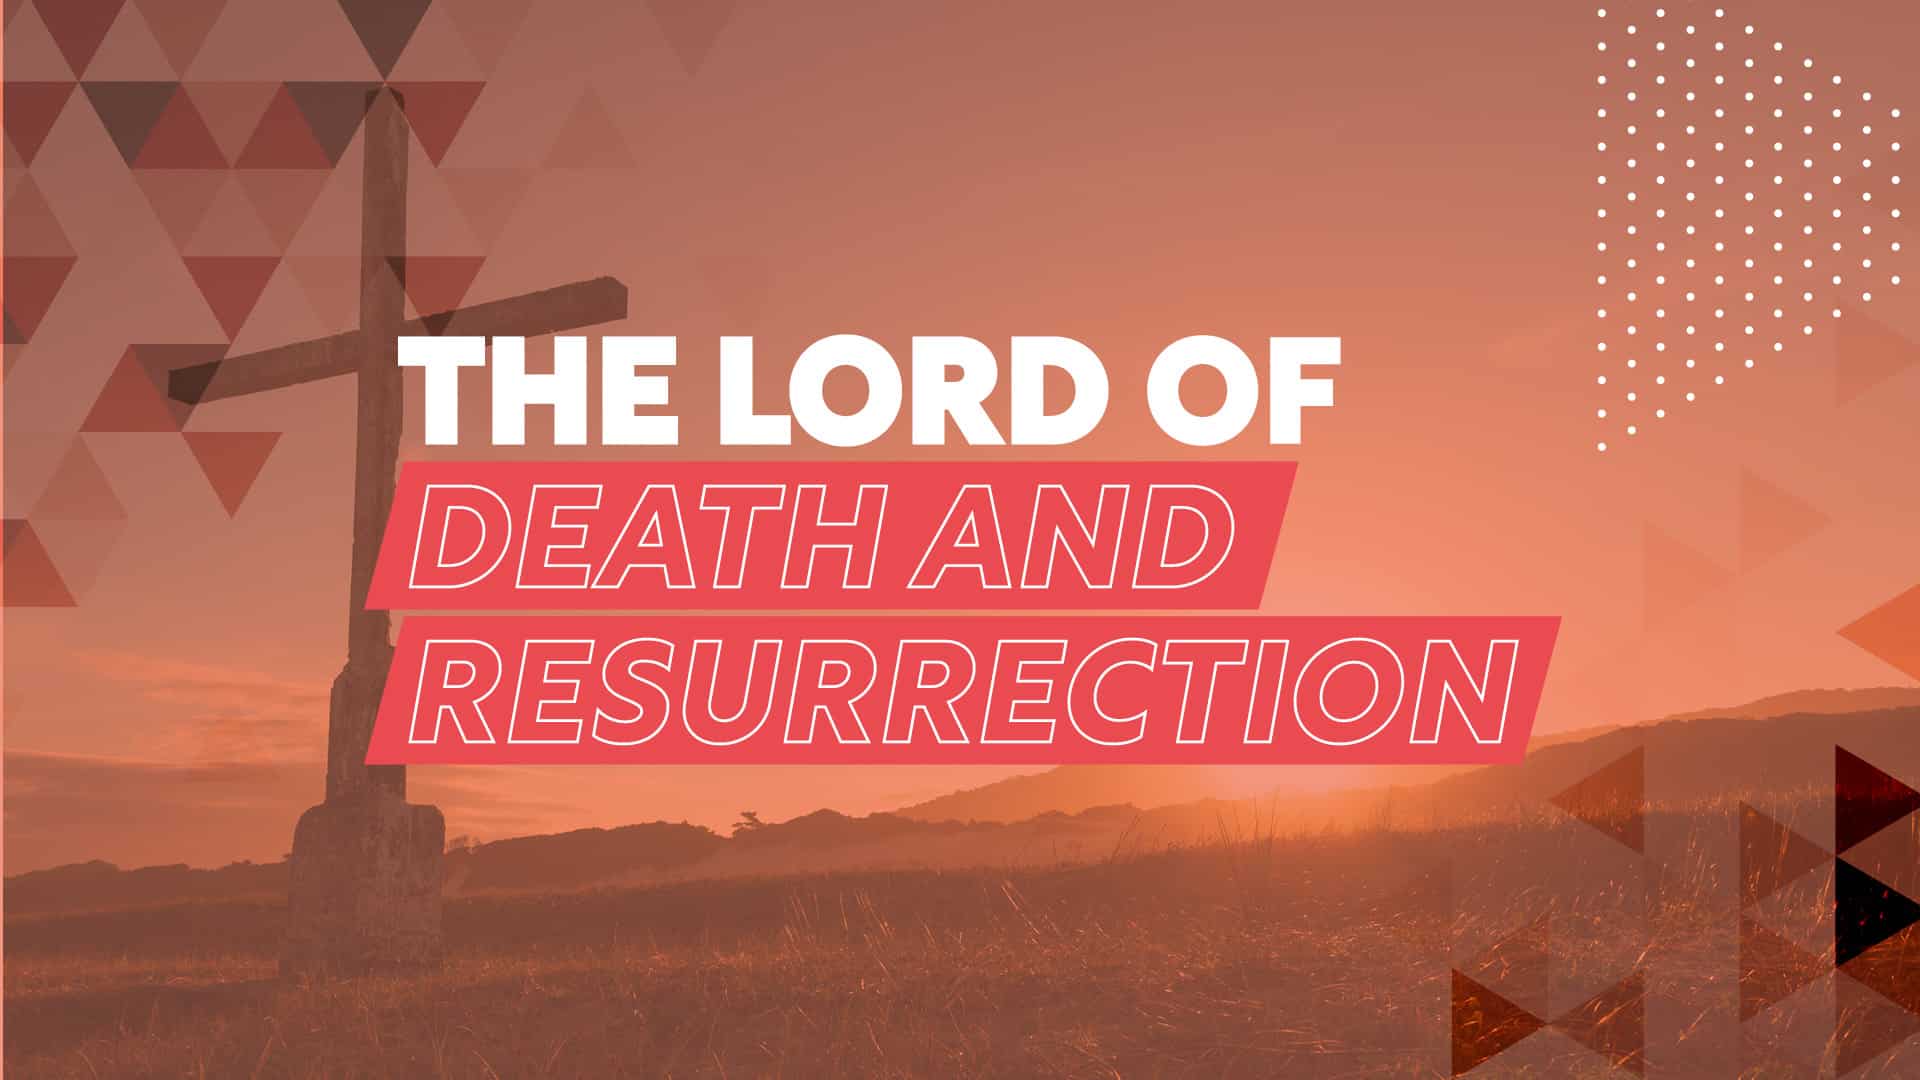 The Lord of Death and Resurrection